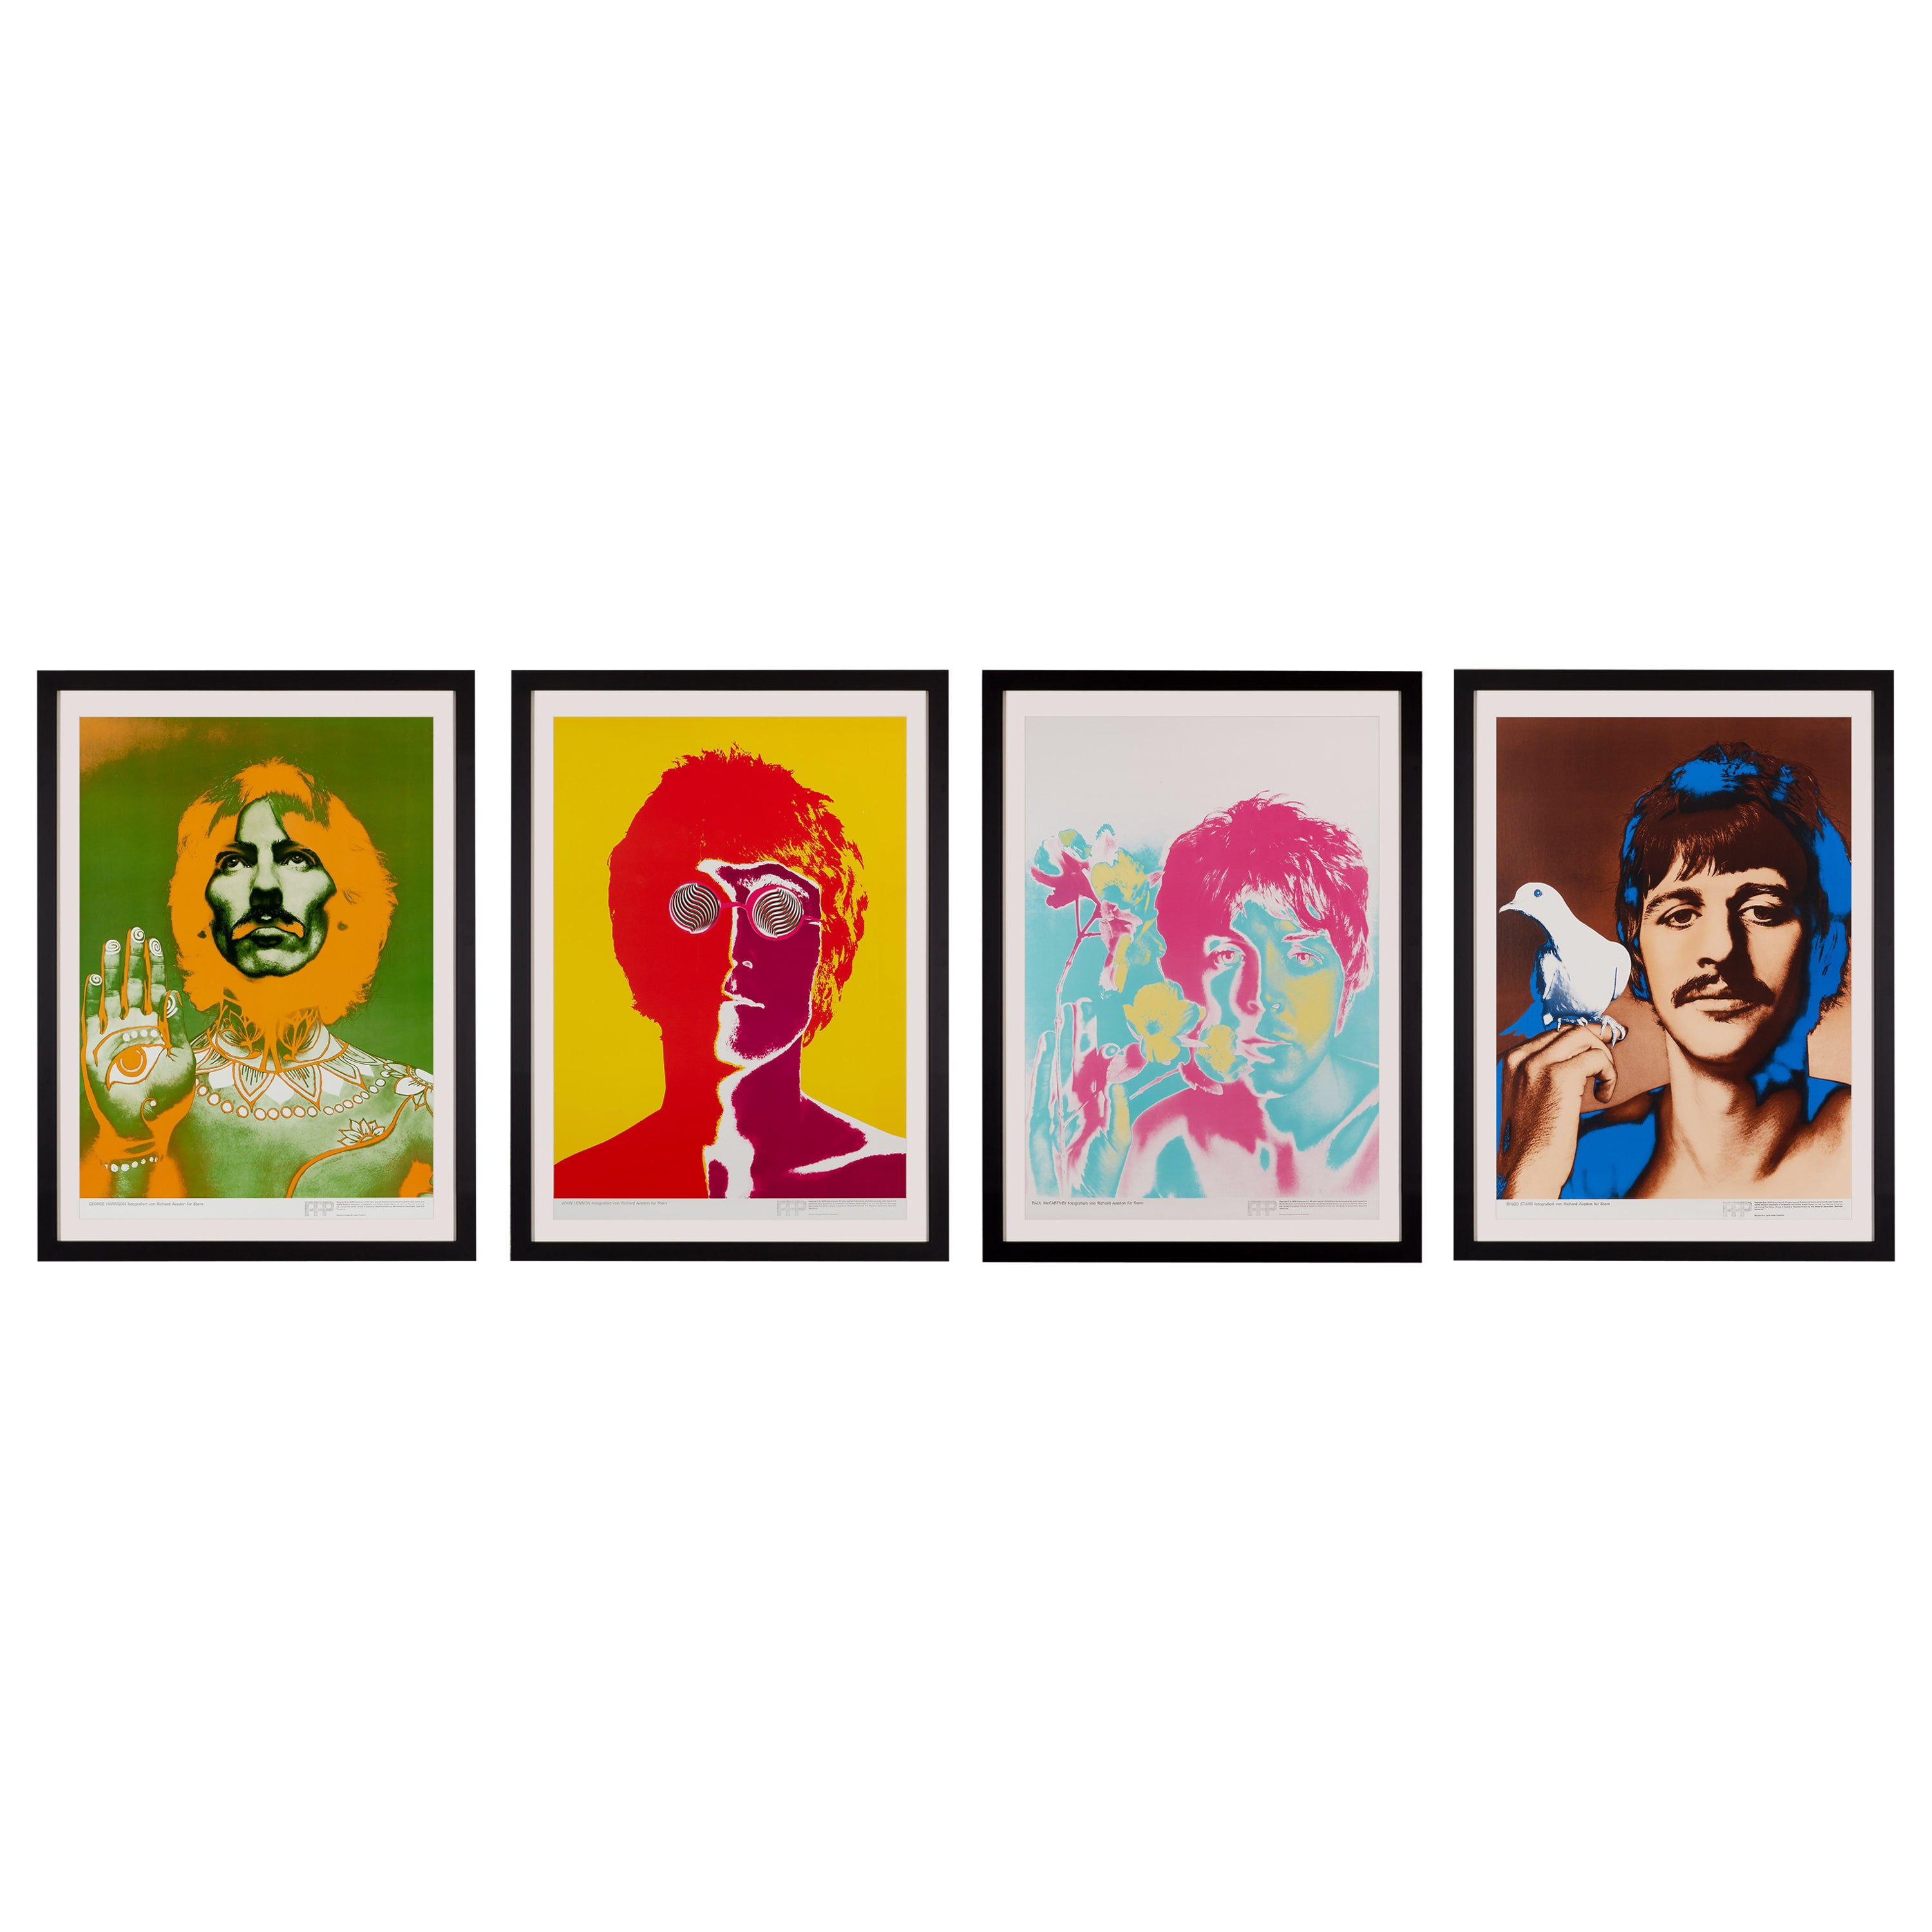 'The Beatles' Complete Set of Five Promotional Posters by Richard Avedon, 1967 For Sale